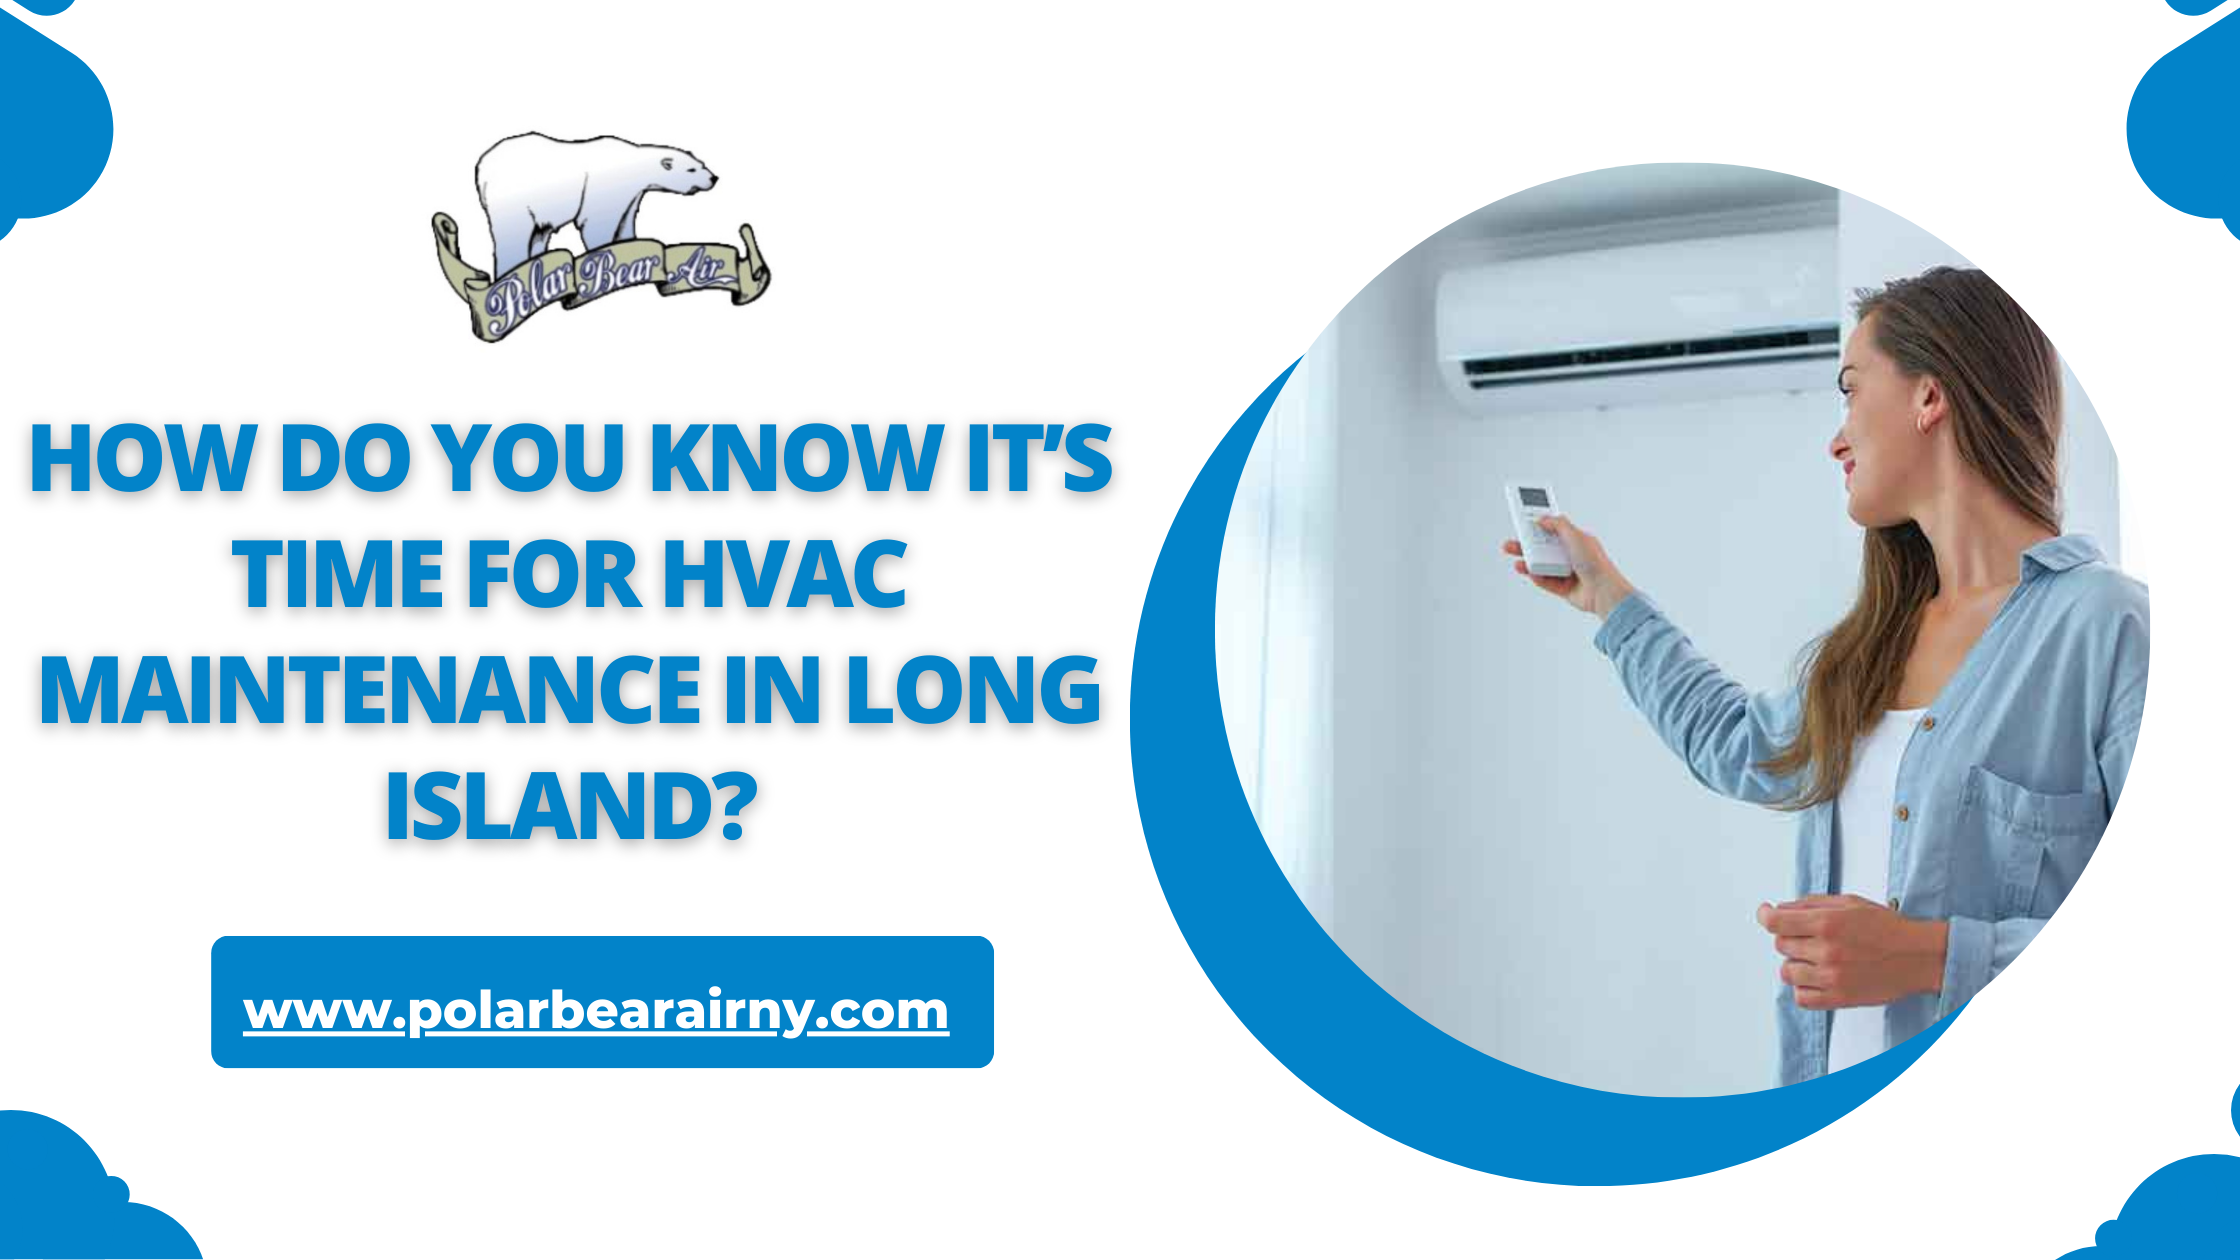 How Do You Know It’s Time for HVAC Maintenance in Long Island?